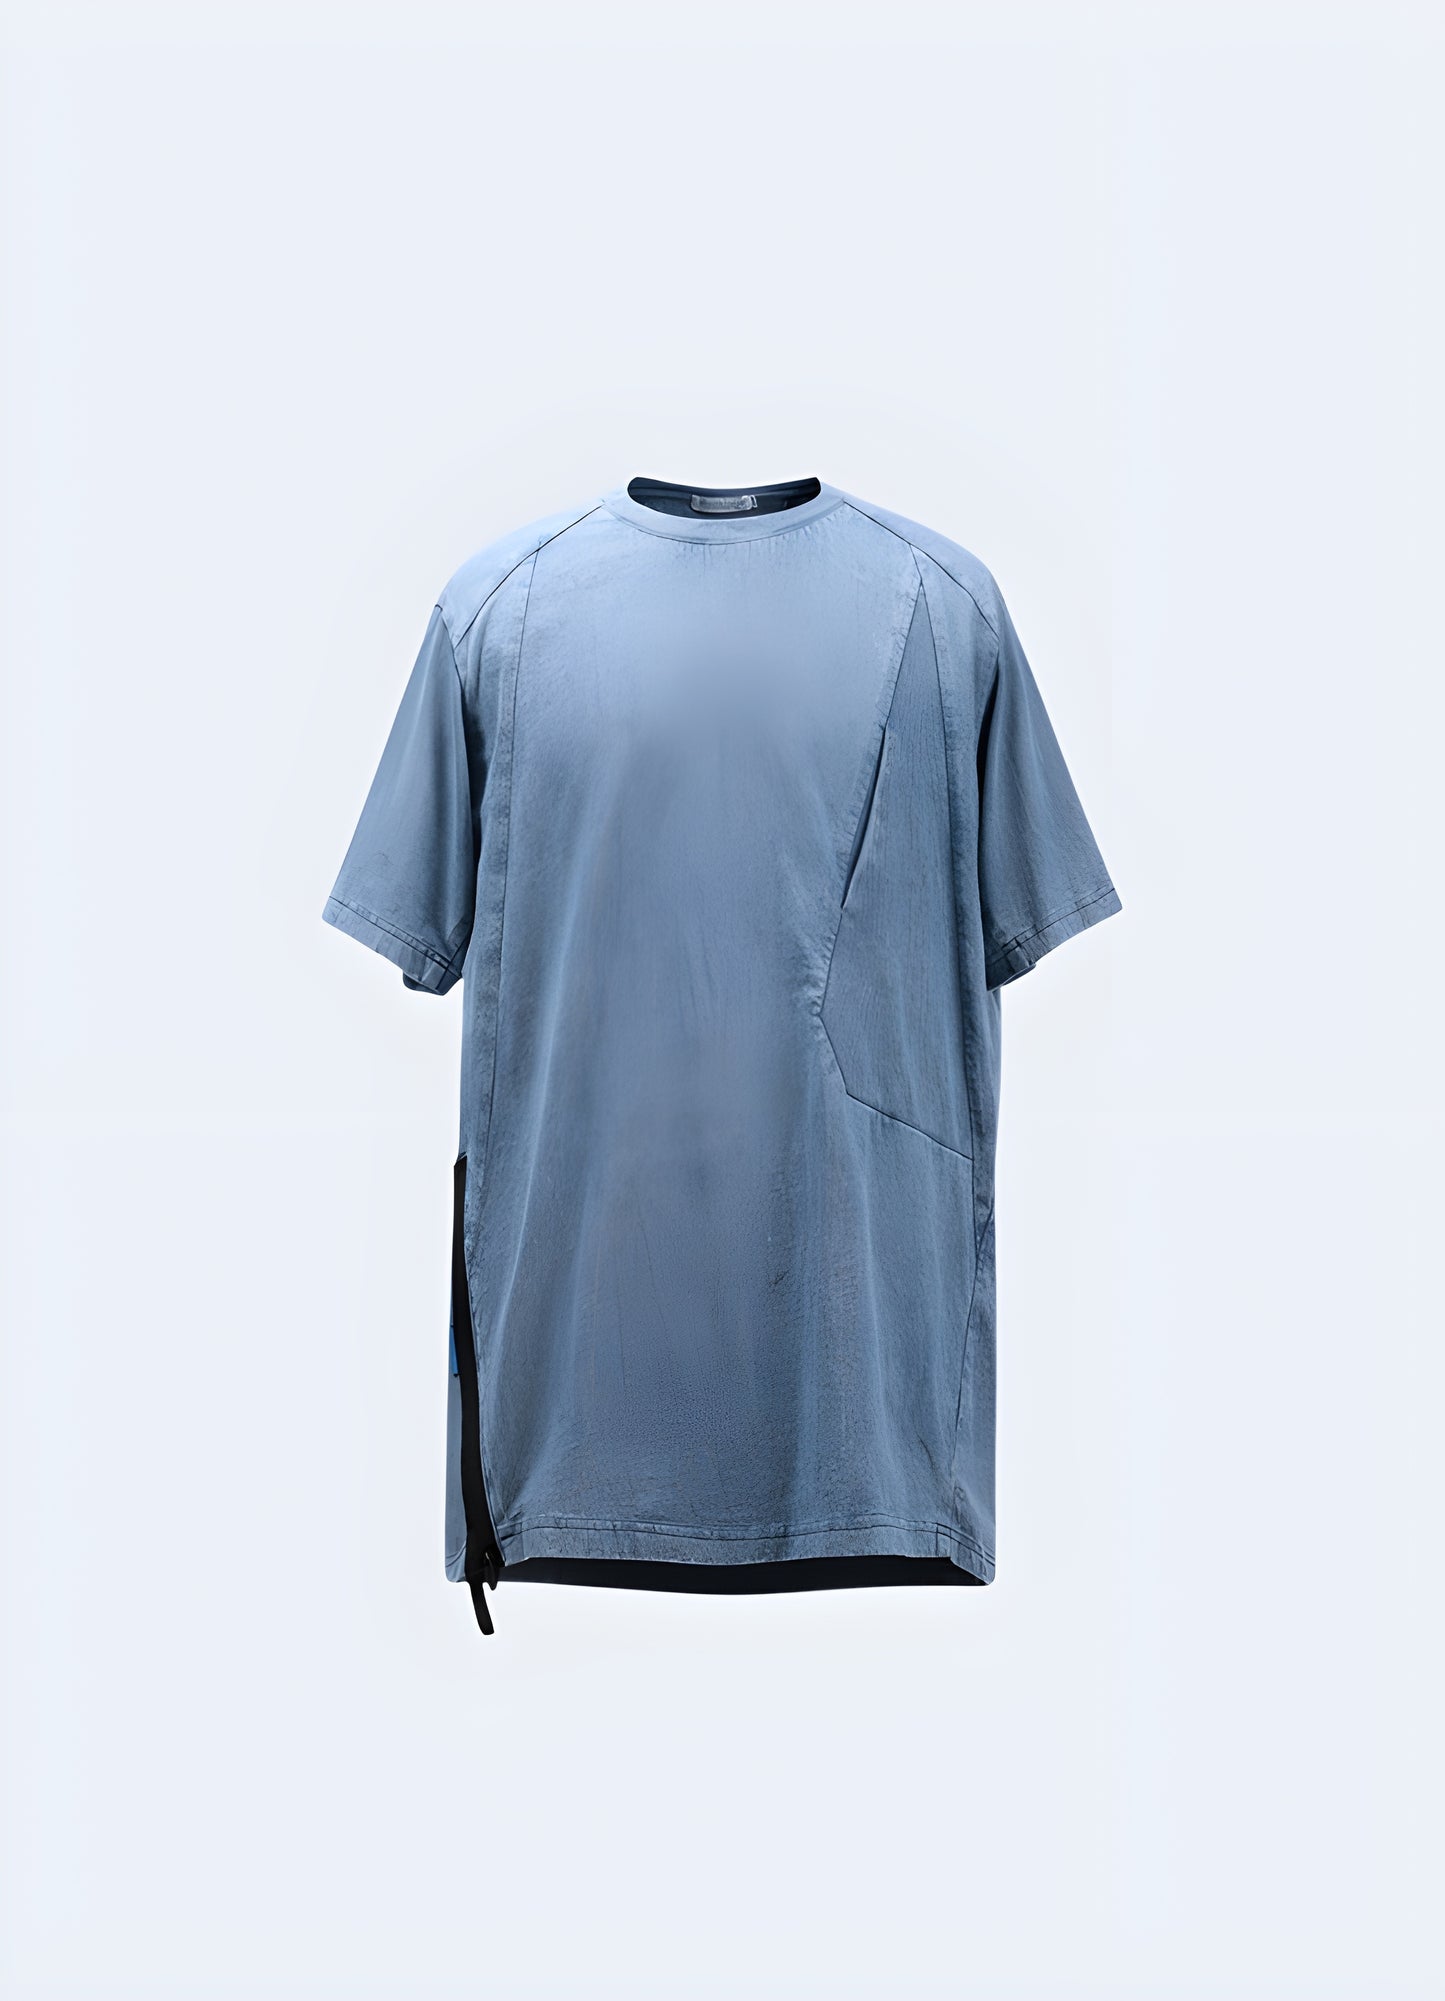 Eye-catching design futuristic shirt blue regular fit for a classic look. 